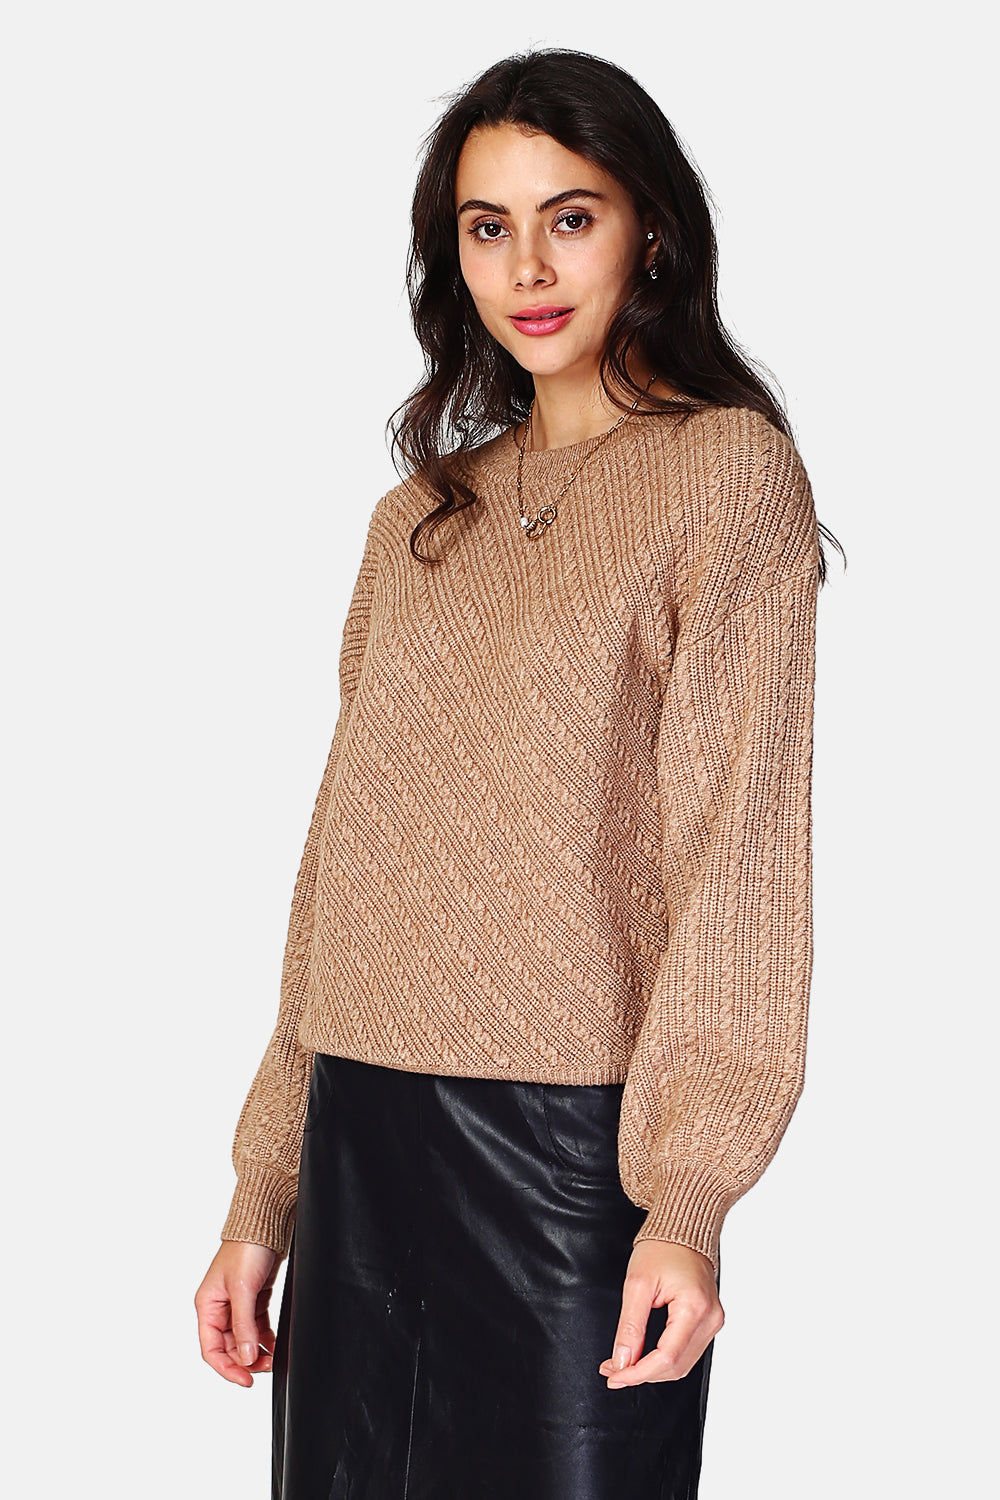 Fancy knit round neck sweater with slightly balloon long sleeves